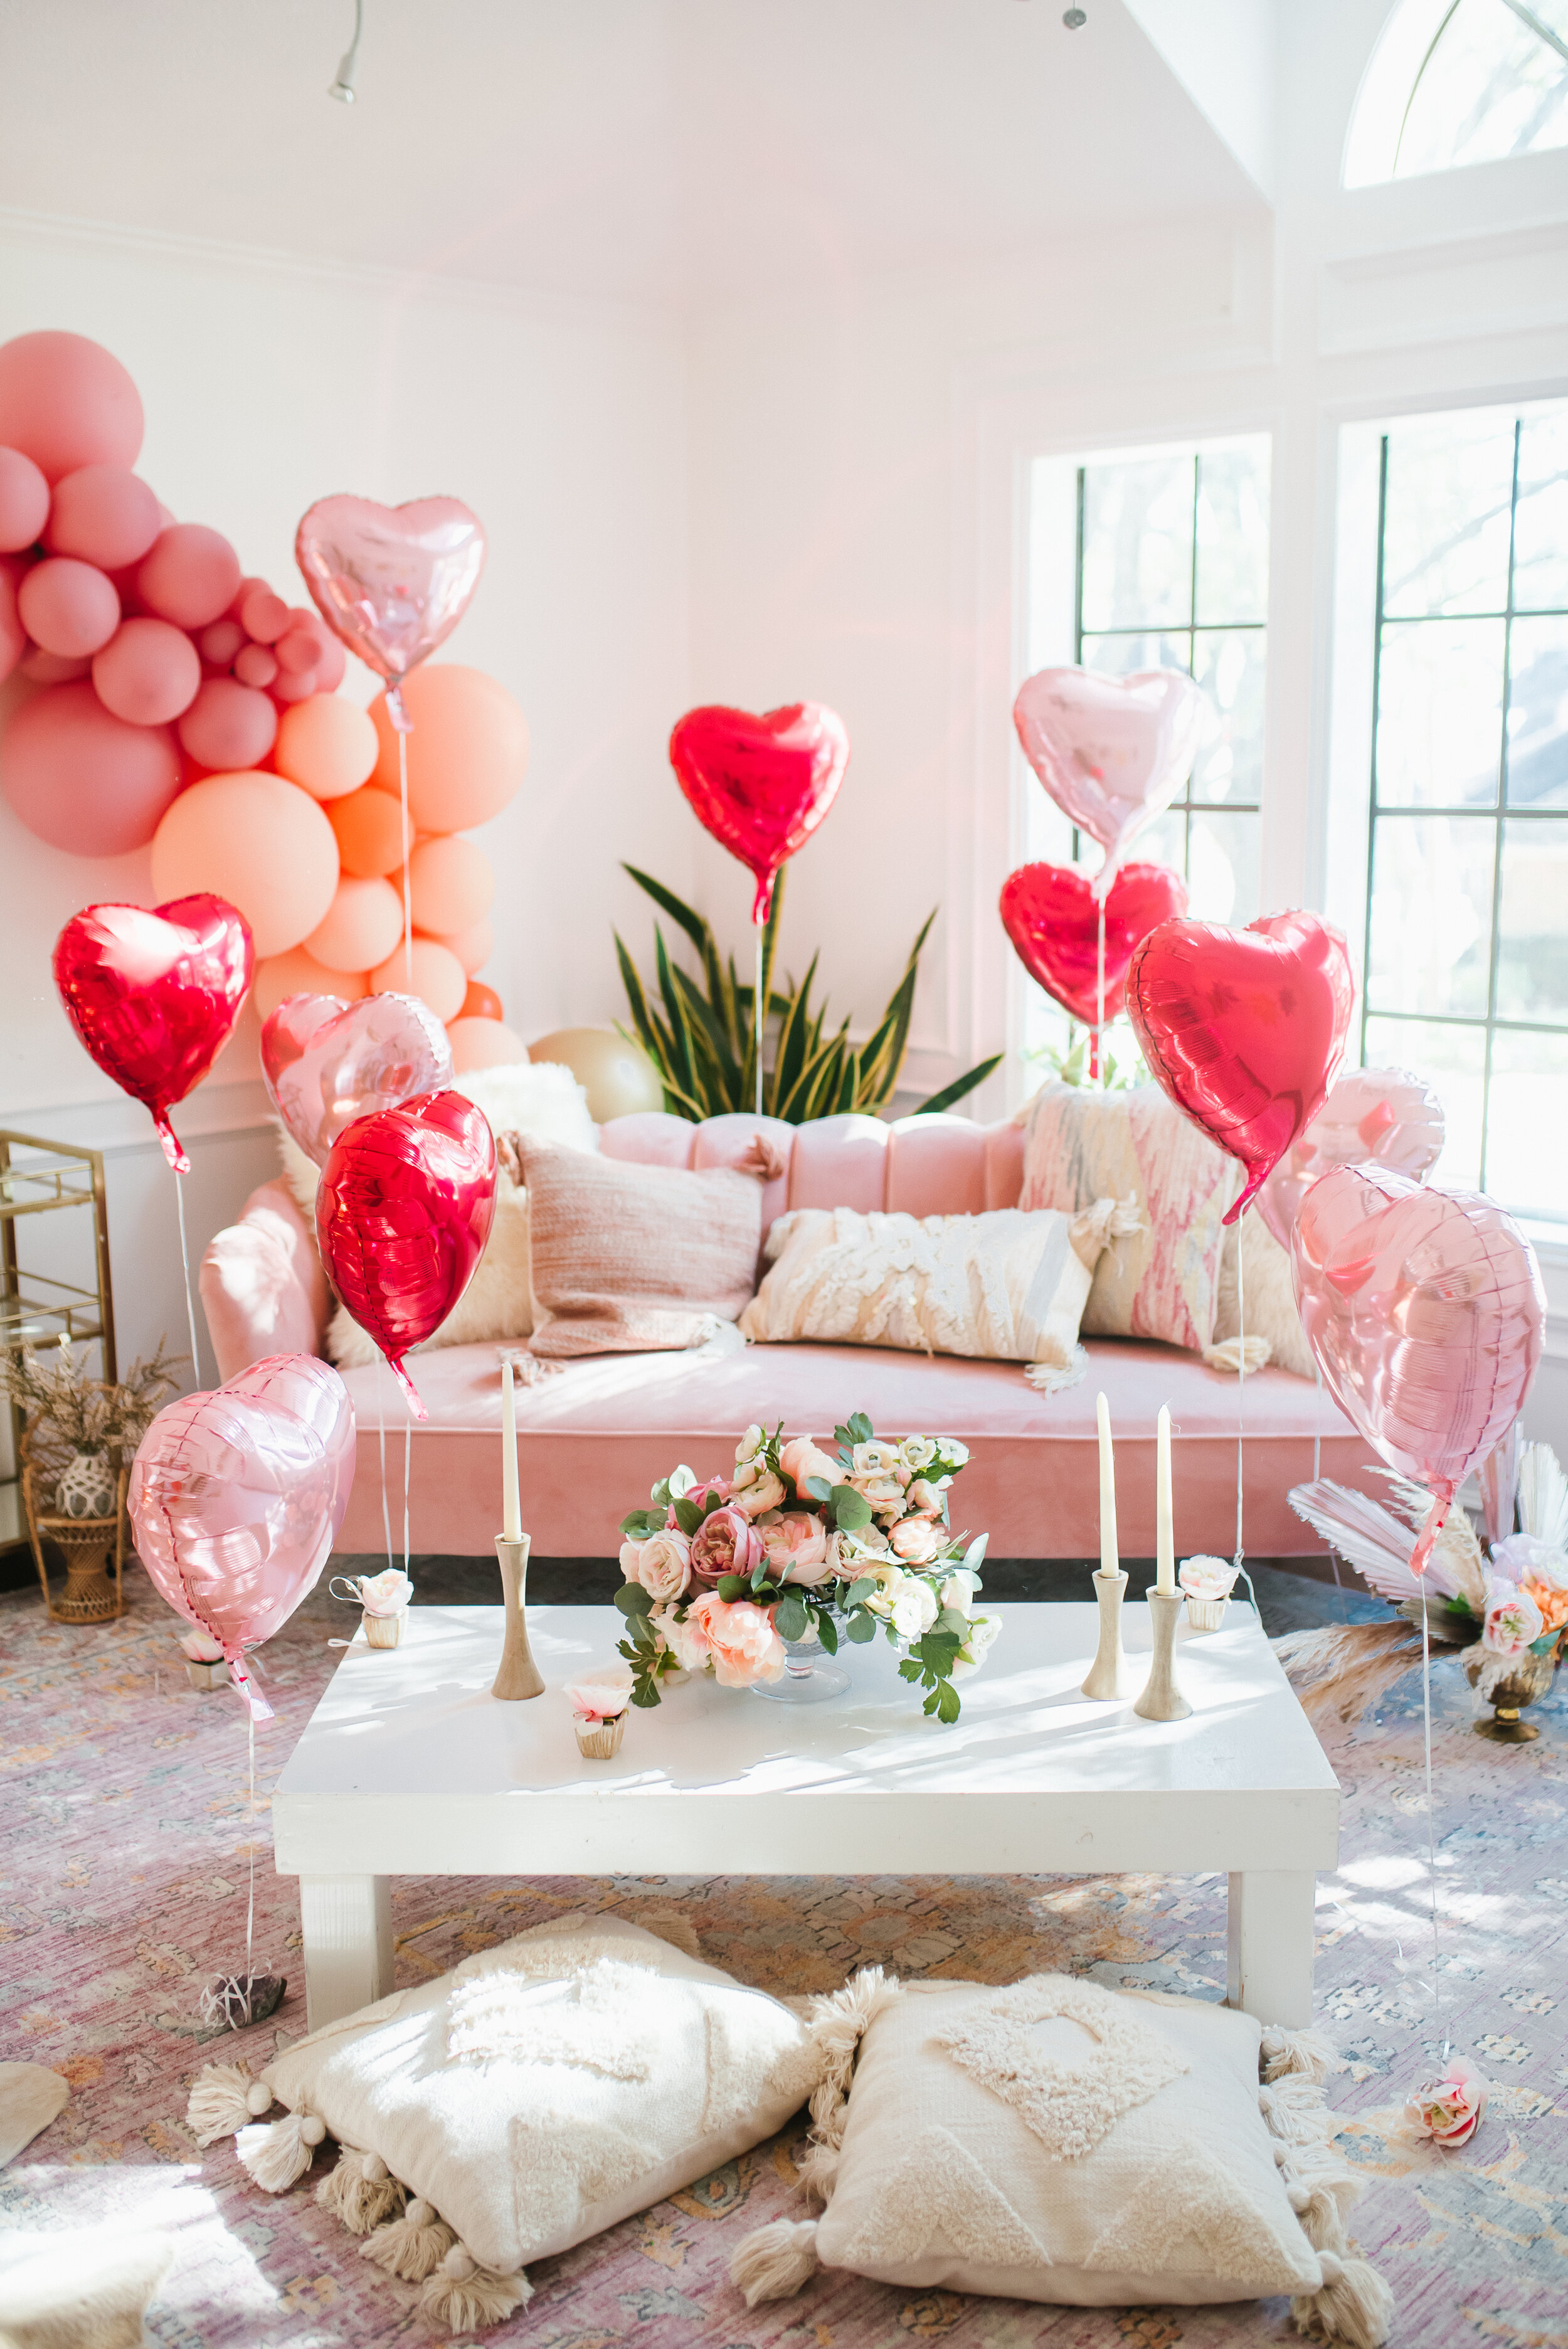 DIY valentine's day balloon photo backdrop on a budget for kids party